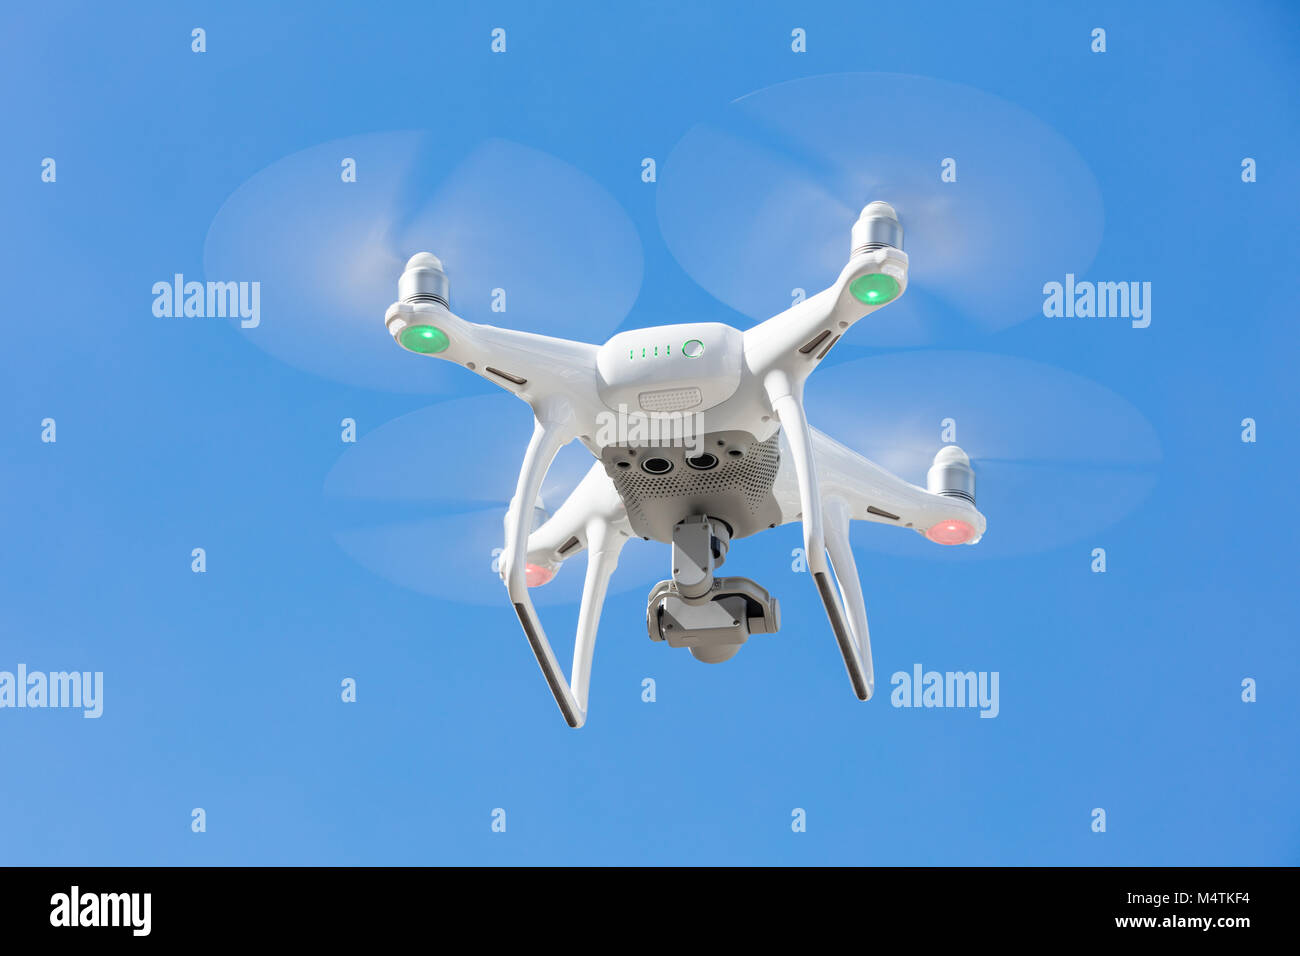 Low angle view of drone flying against clear blue sky Stock Photo